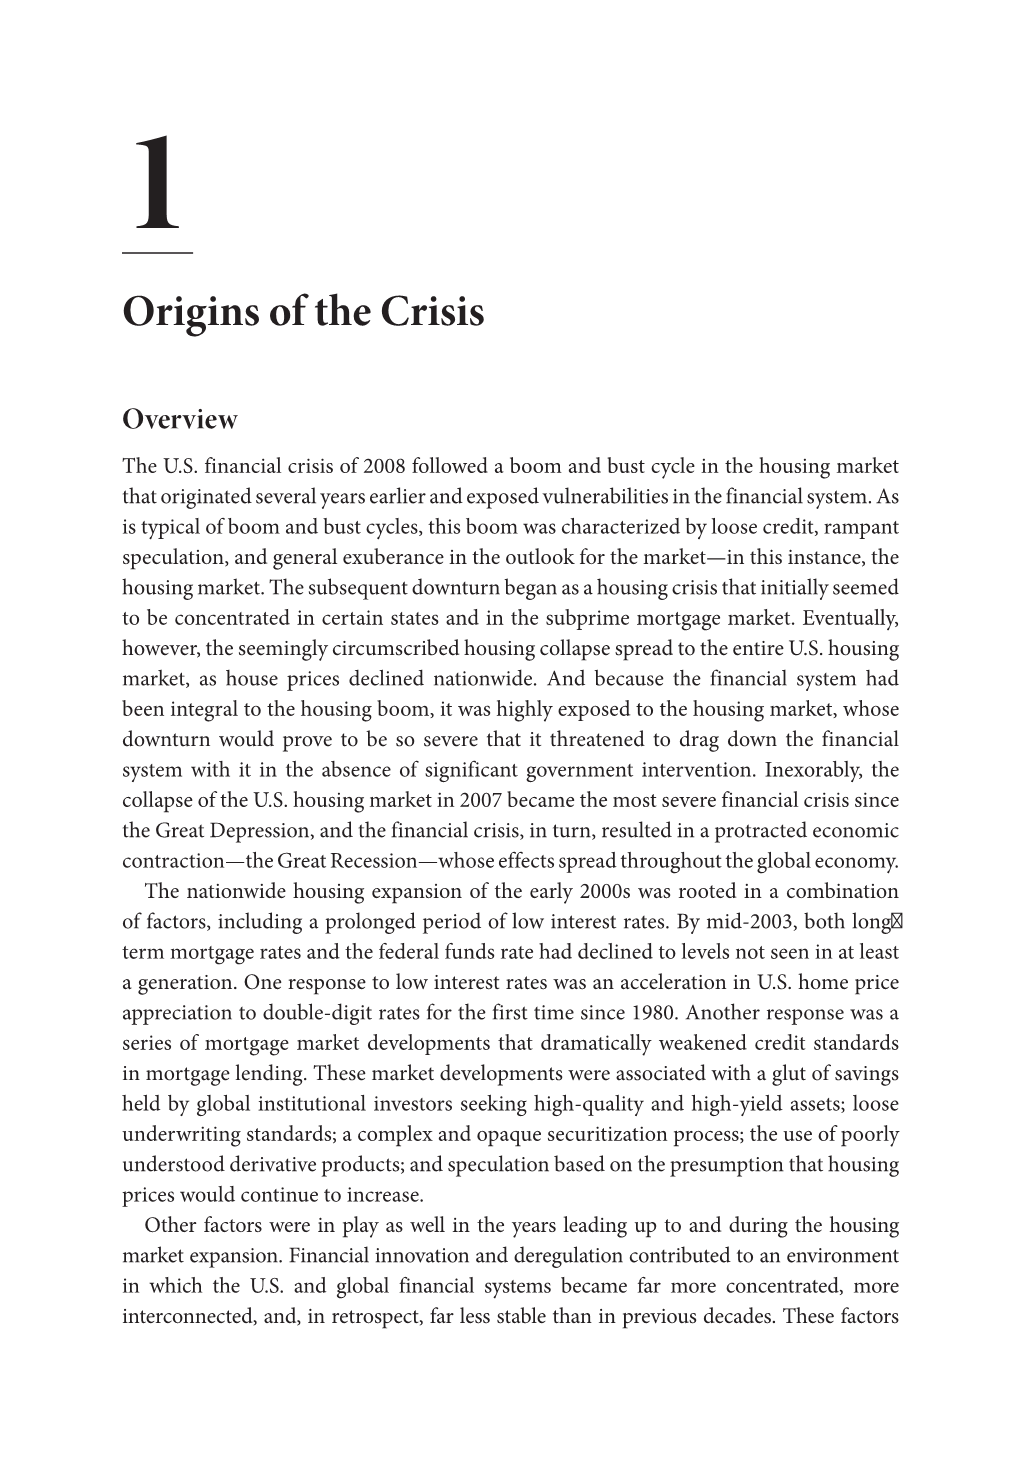 CRISIS and RESPONSE: an FDIC HISTORY, 2008–2013 and the Ones Mentioned in the Preceding Paragraph Helped Fuel a Housing Boom While Also Making the U.S